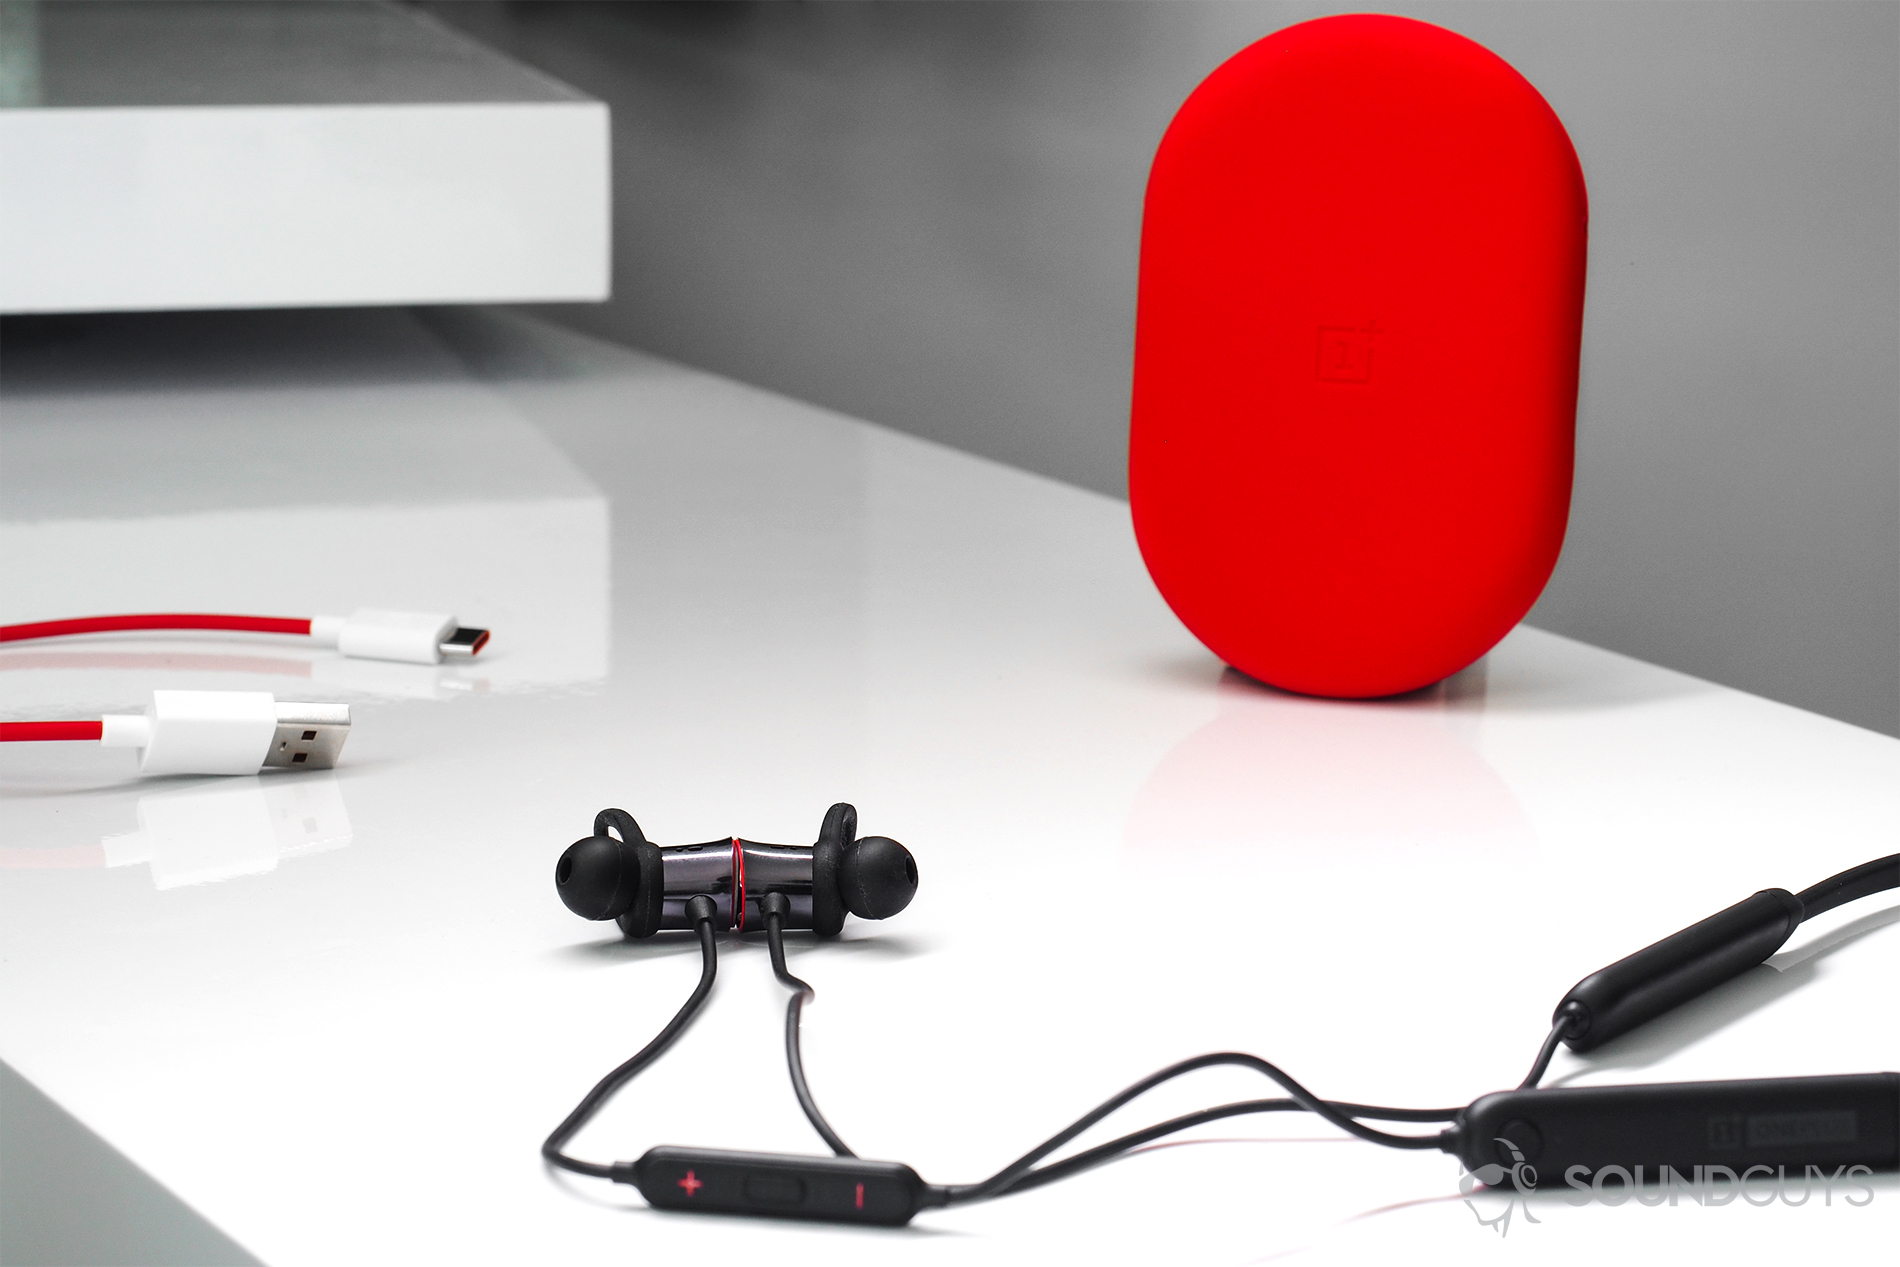 A bright image of the OnePlus Bullets Wireless earbuds with part of the neckband showing and the red carrying case standing vertically in the background.